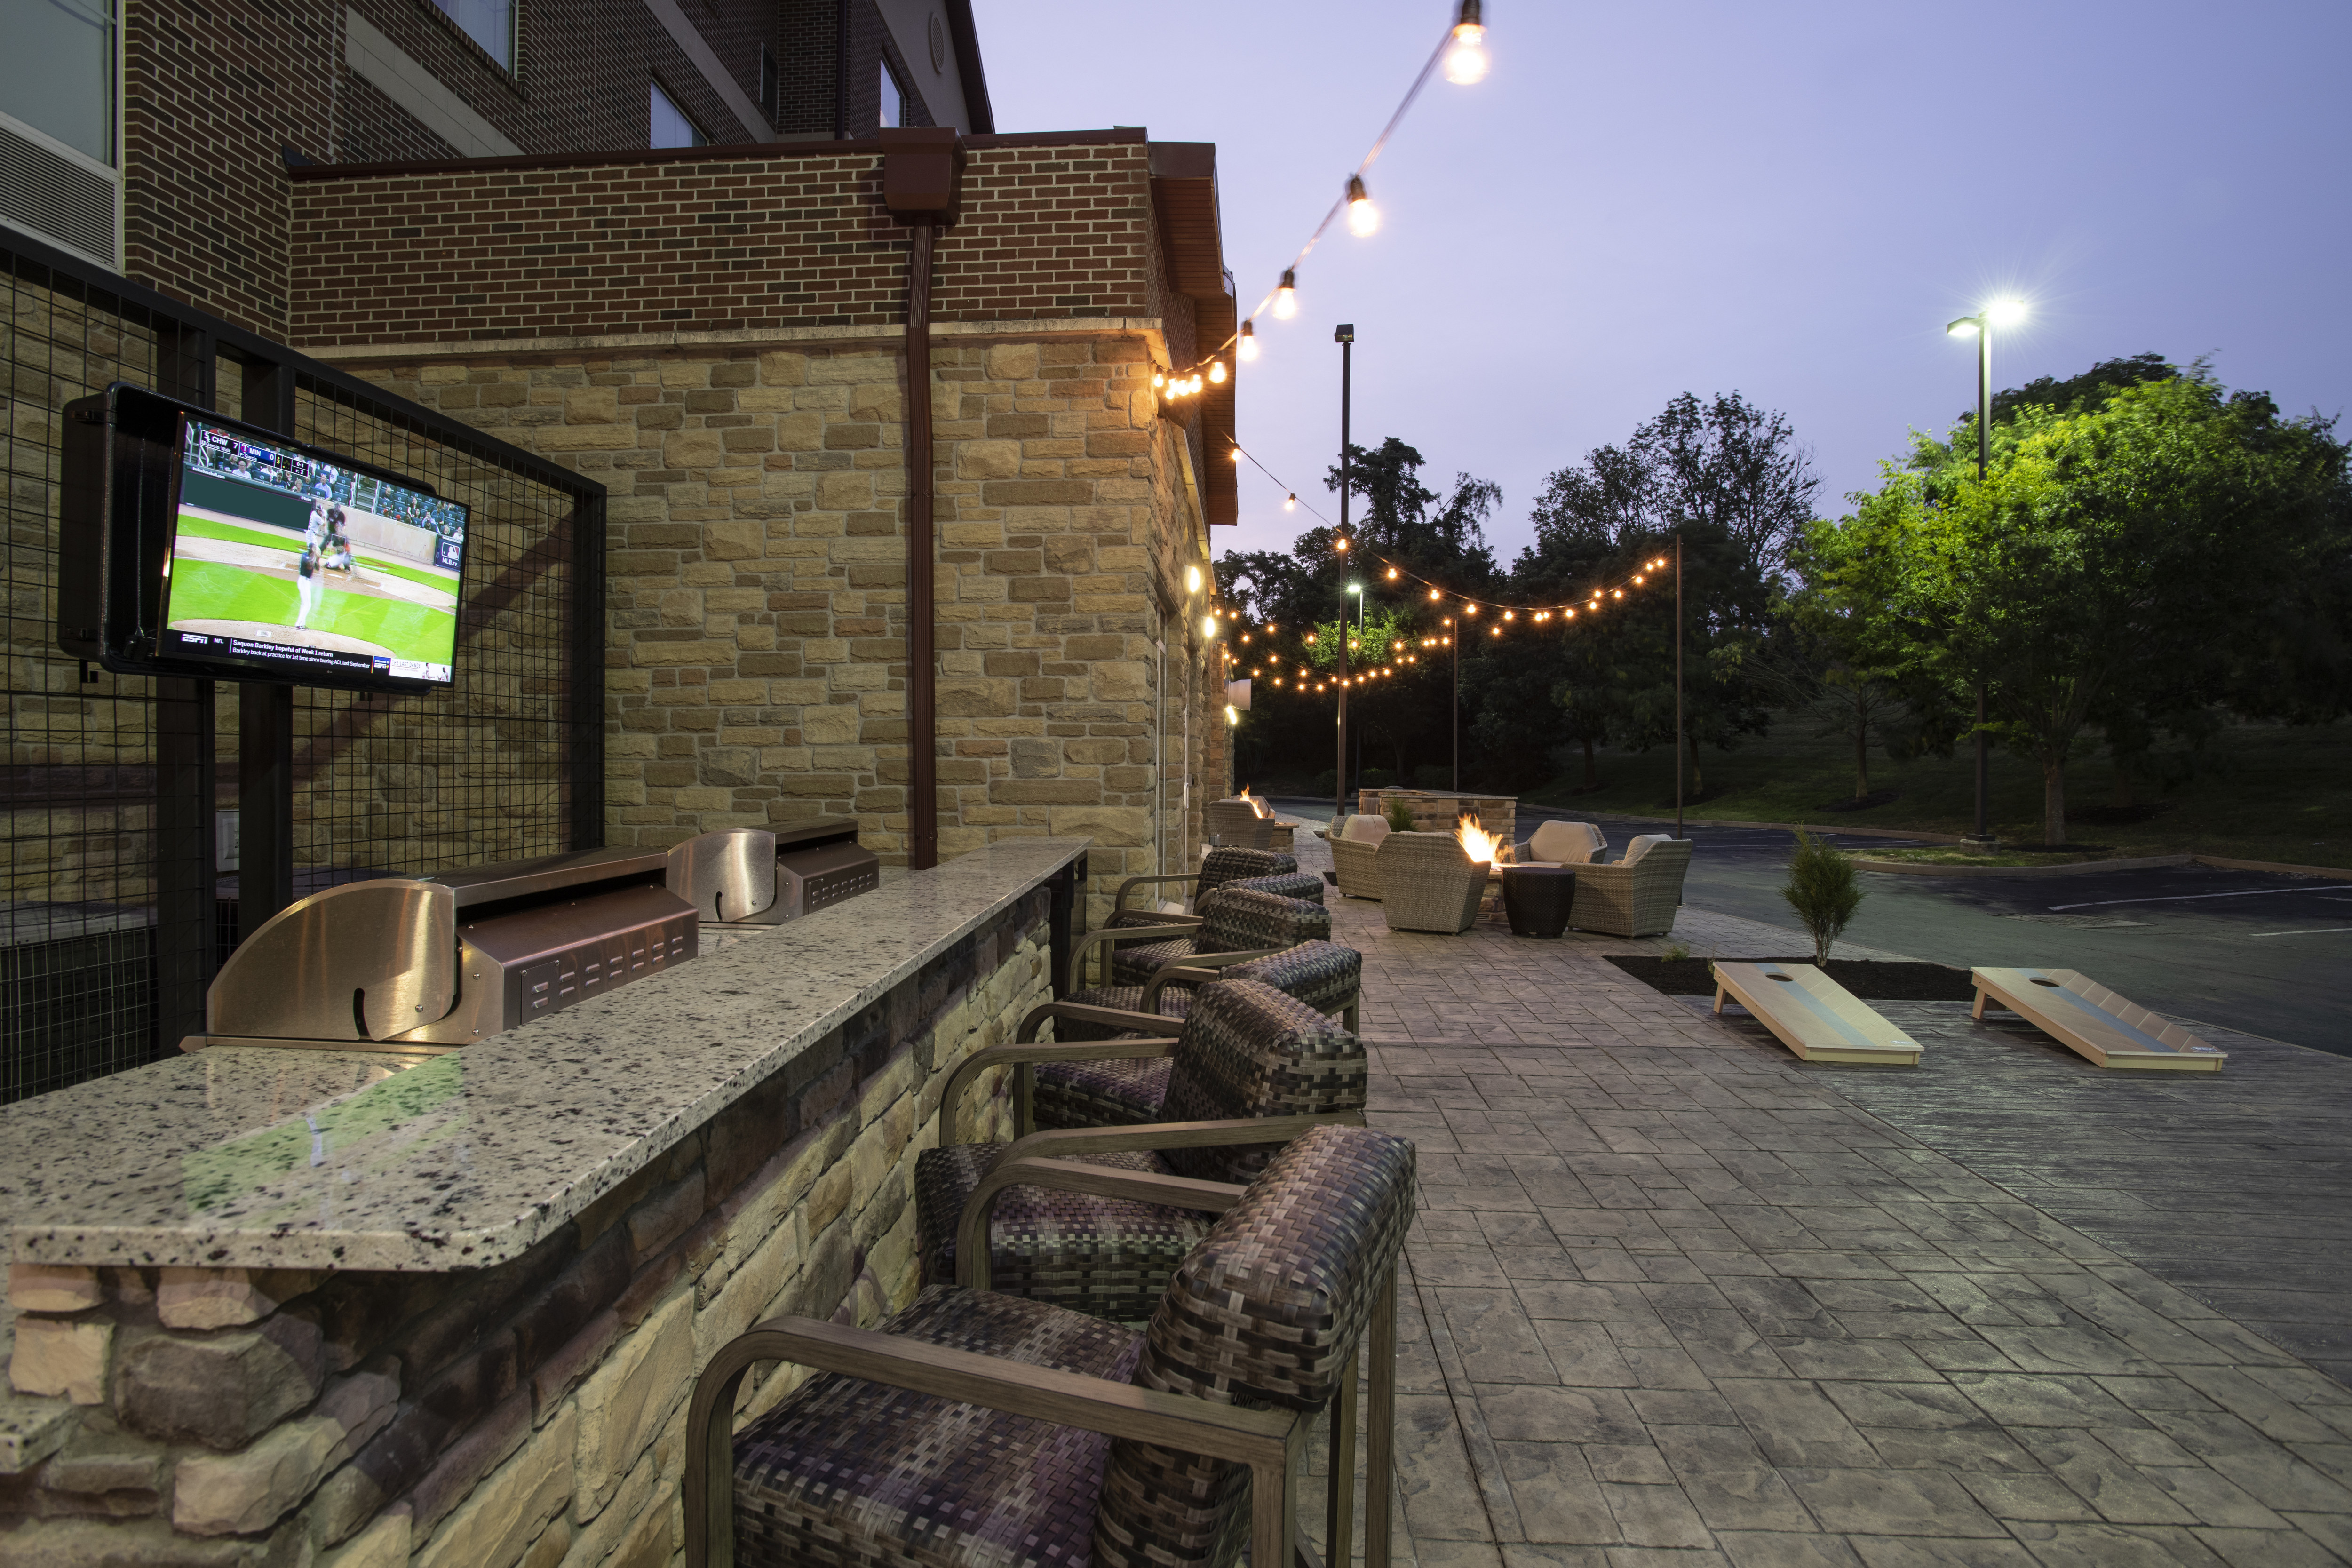 HDTV and Grill Area in Outdoor Patio with Fire Pit 